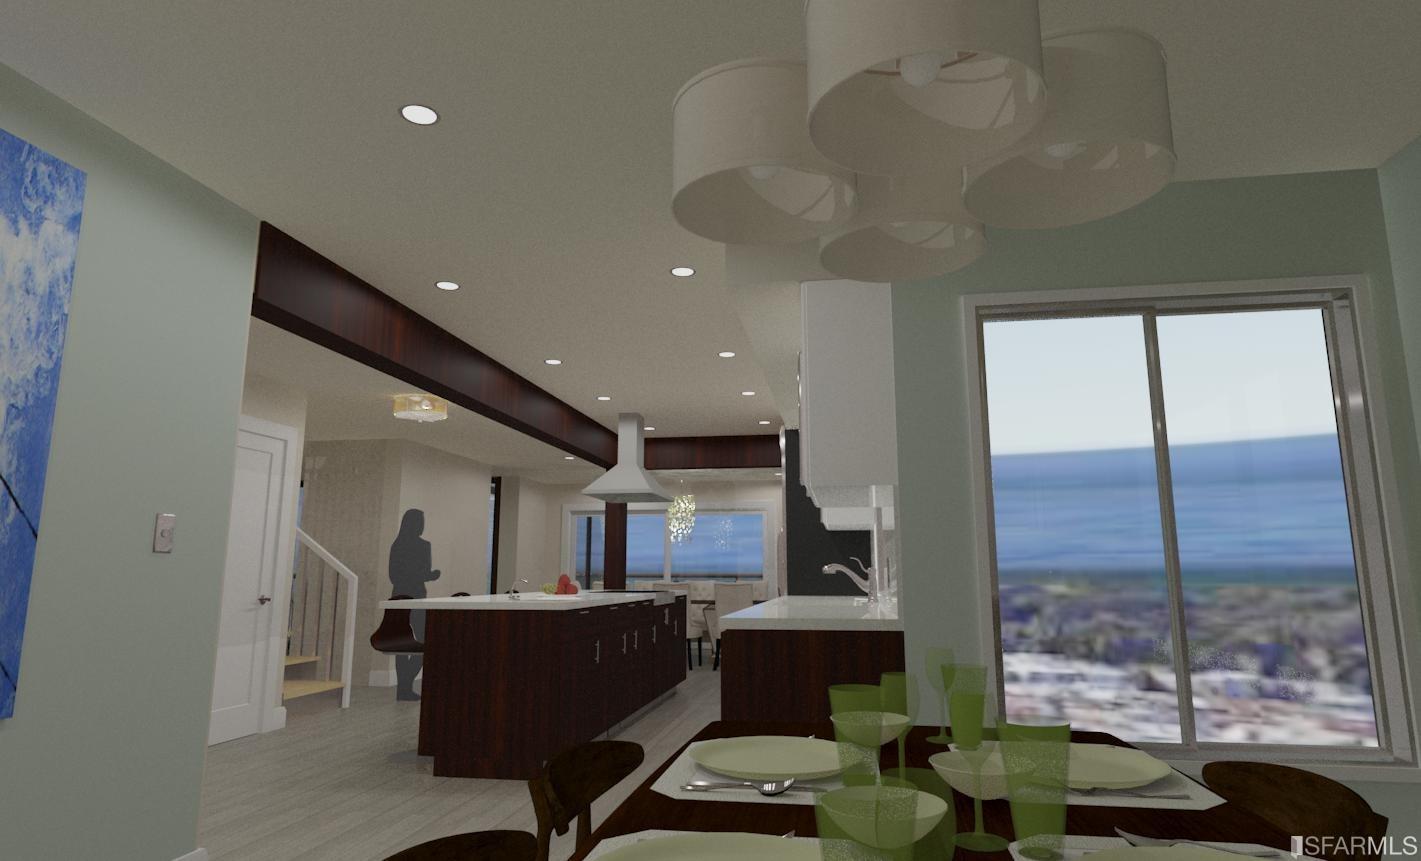 View from dining area in kitchen toward kitchen - note the expansive ocean views!